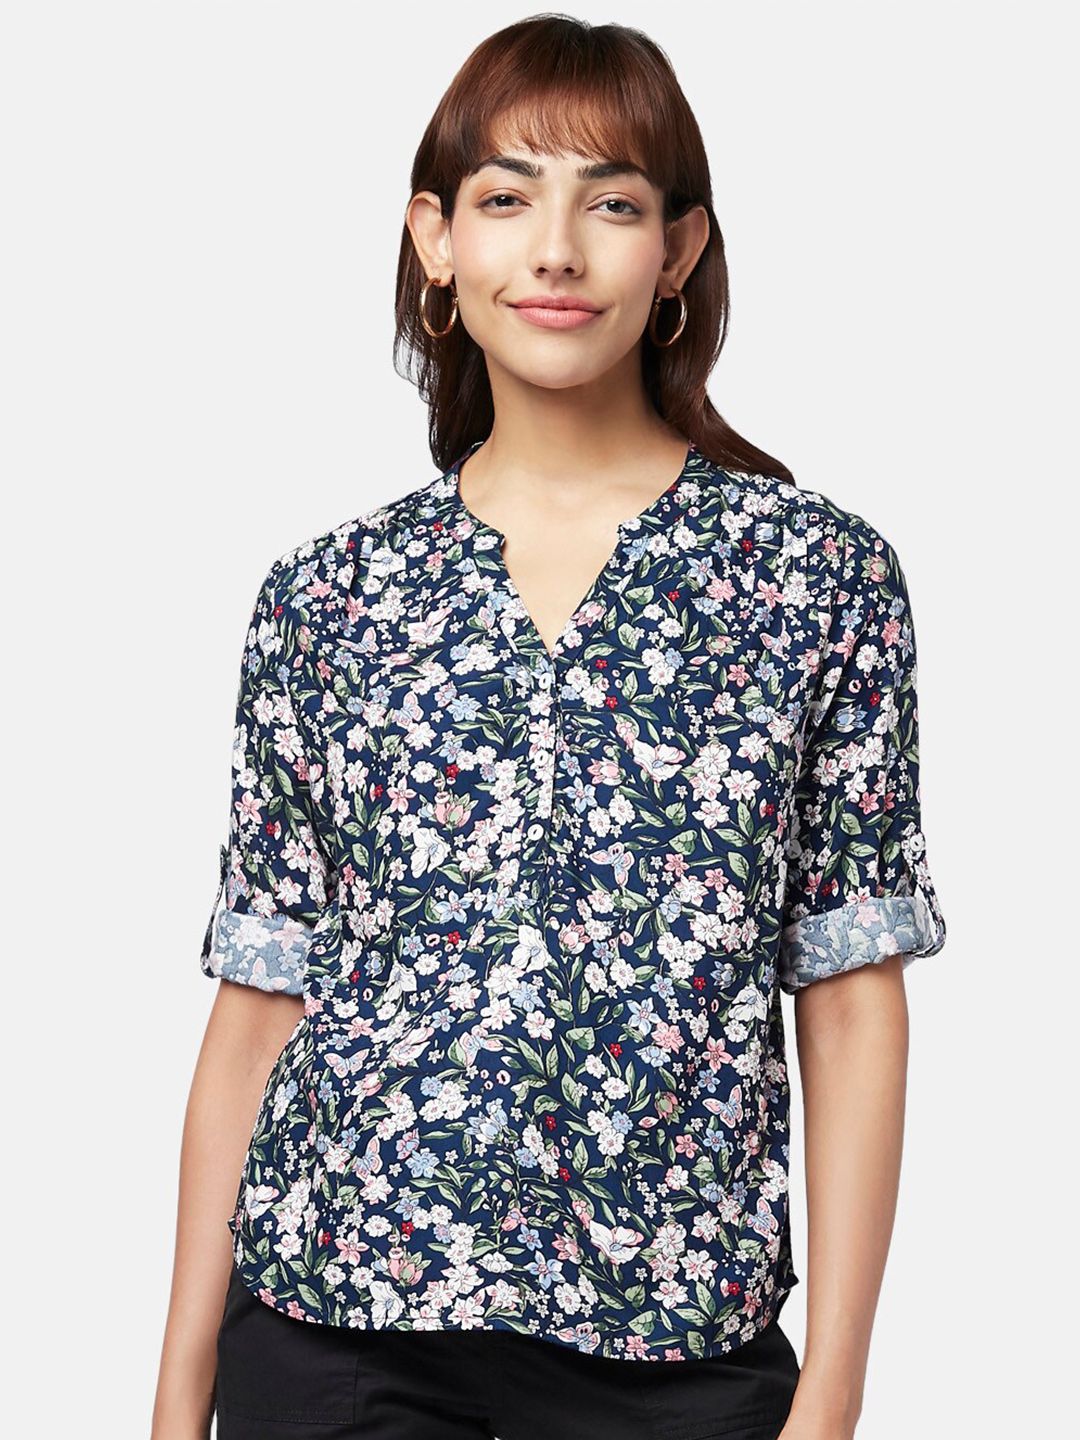 Honey by Pantaloons Navy Blue & White Floral Print Mandarin Collar Roll-Up Sleeves Top Price in India